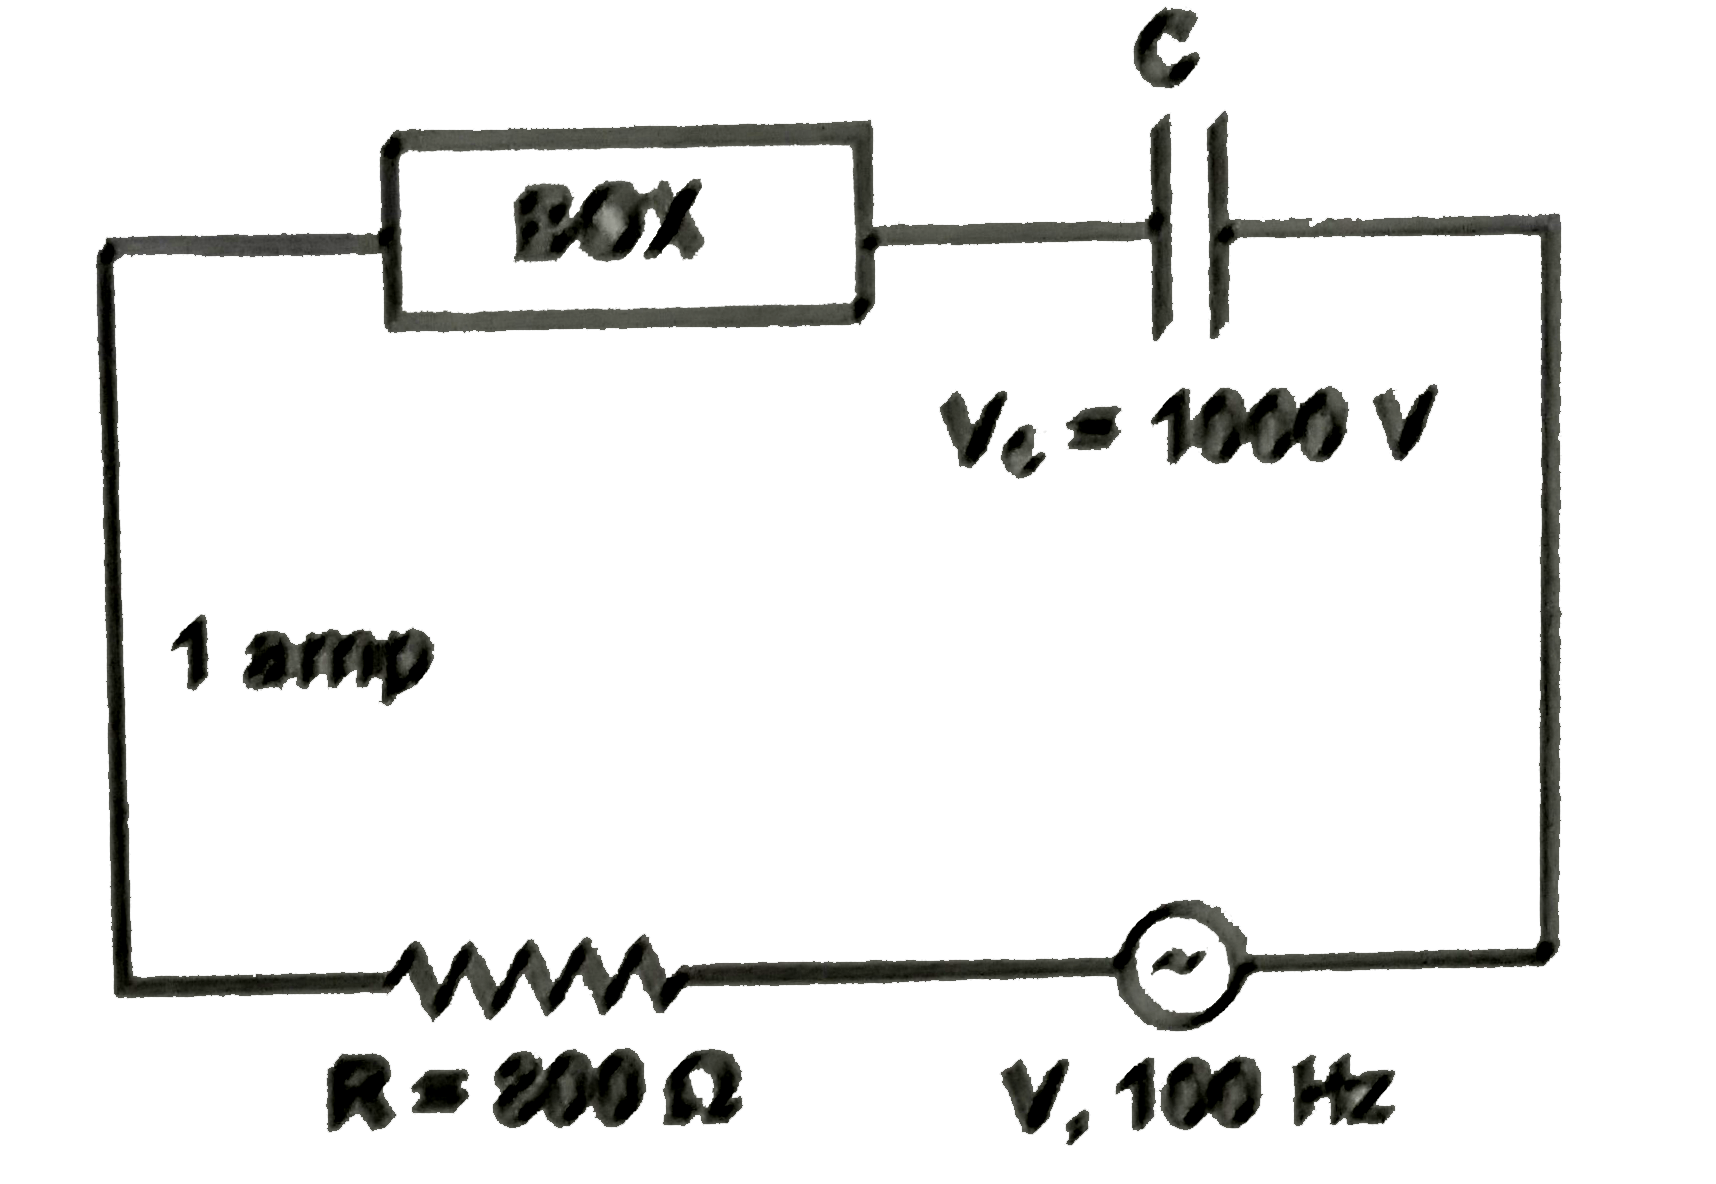 A circuit shown in the figure contains a box having either a capacitor or an inductor. The power factor of the circuit is 0.8, while current lags behind the voltage. Then find the inductance/capacitance of the box is S.I. unit (take pi=3.2). The circuit draws 1 ampere current.